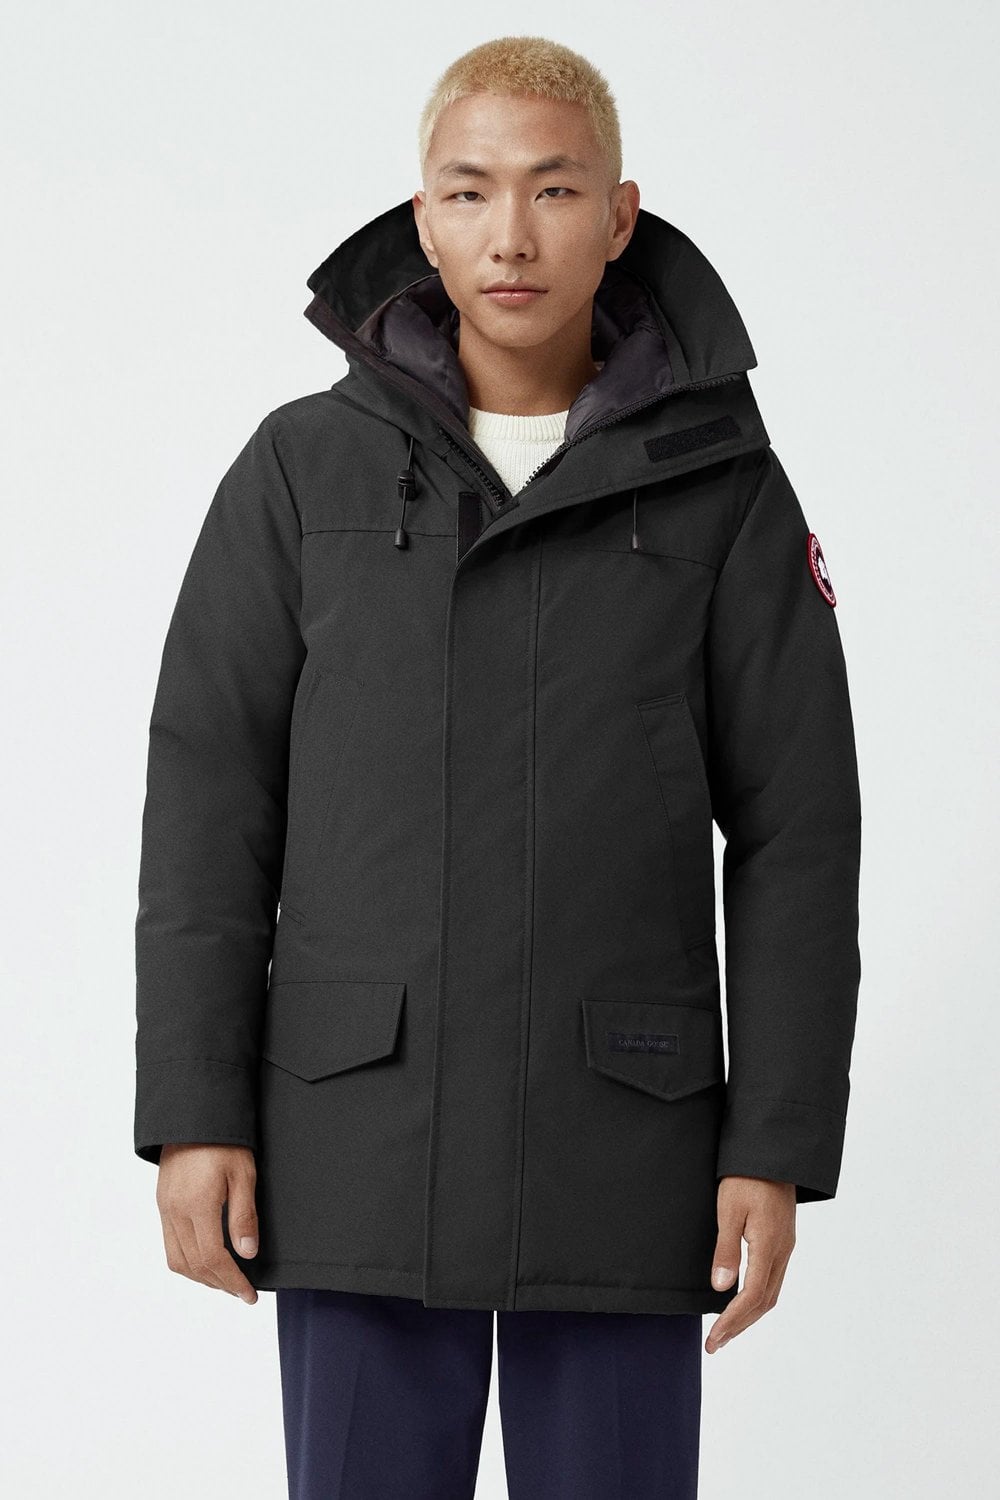 Canada Goose Fusion Fit Langford Parka in Black